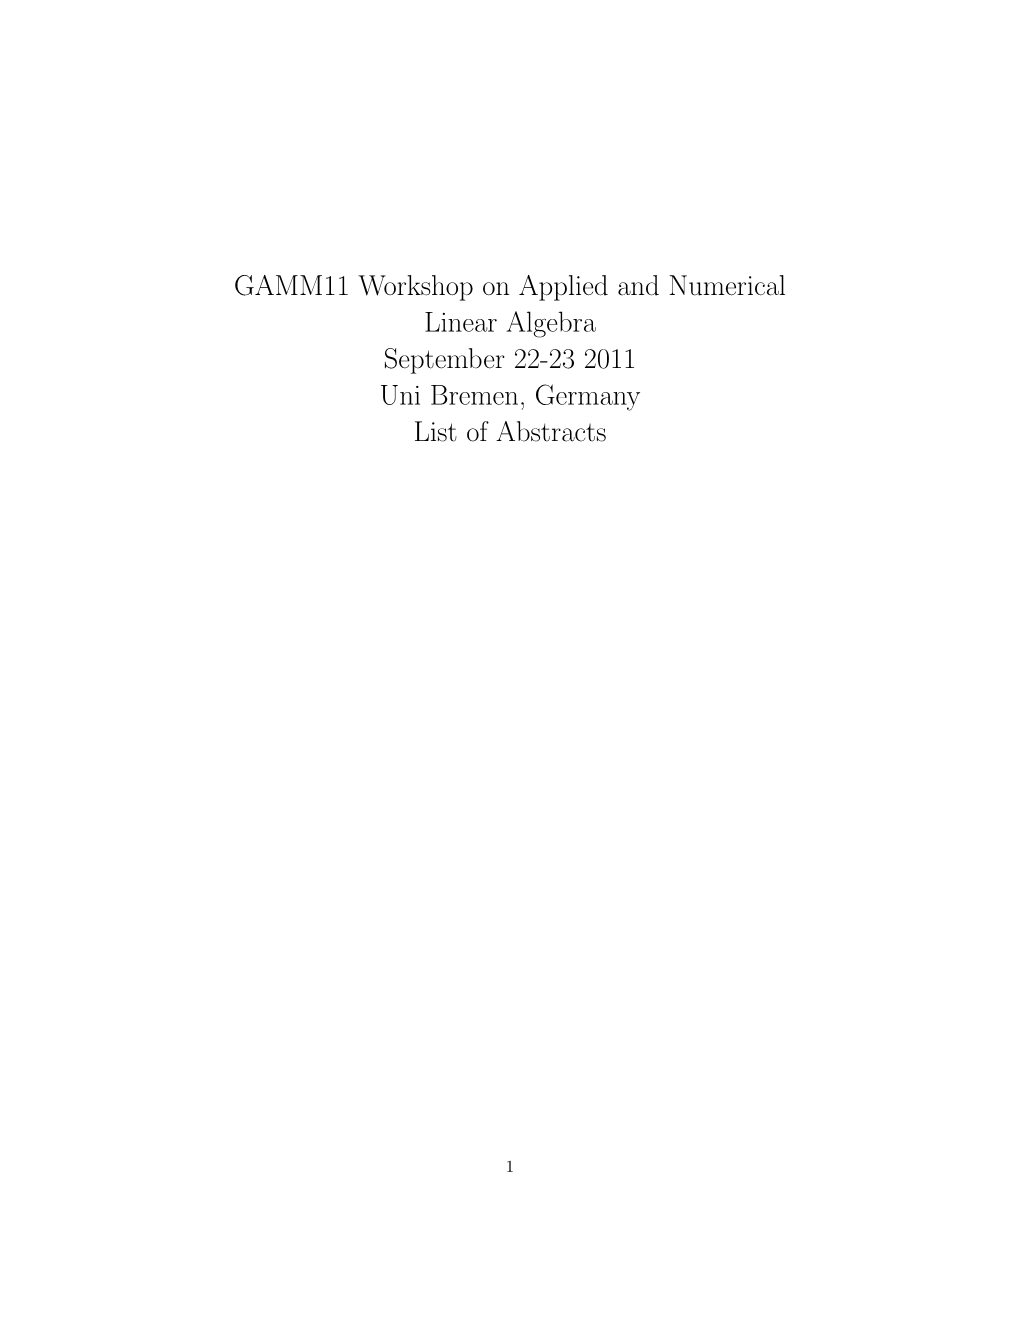 GAMM11 Workshop on Applied and Numerical Linear Algebra September 22-23 2011 Uni Bremen, Germany List of Abstracts